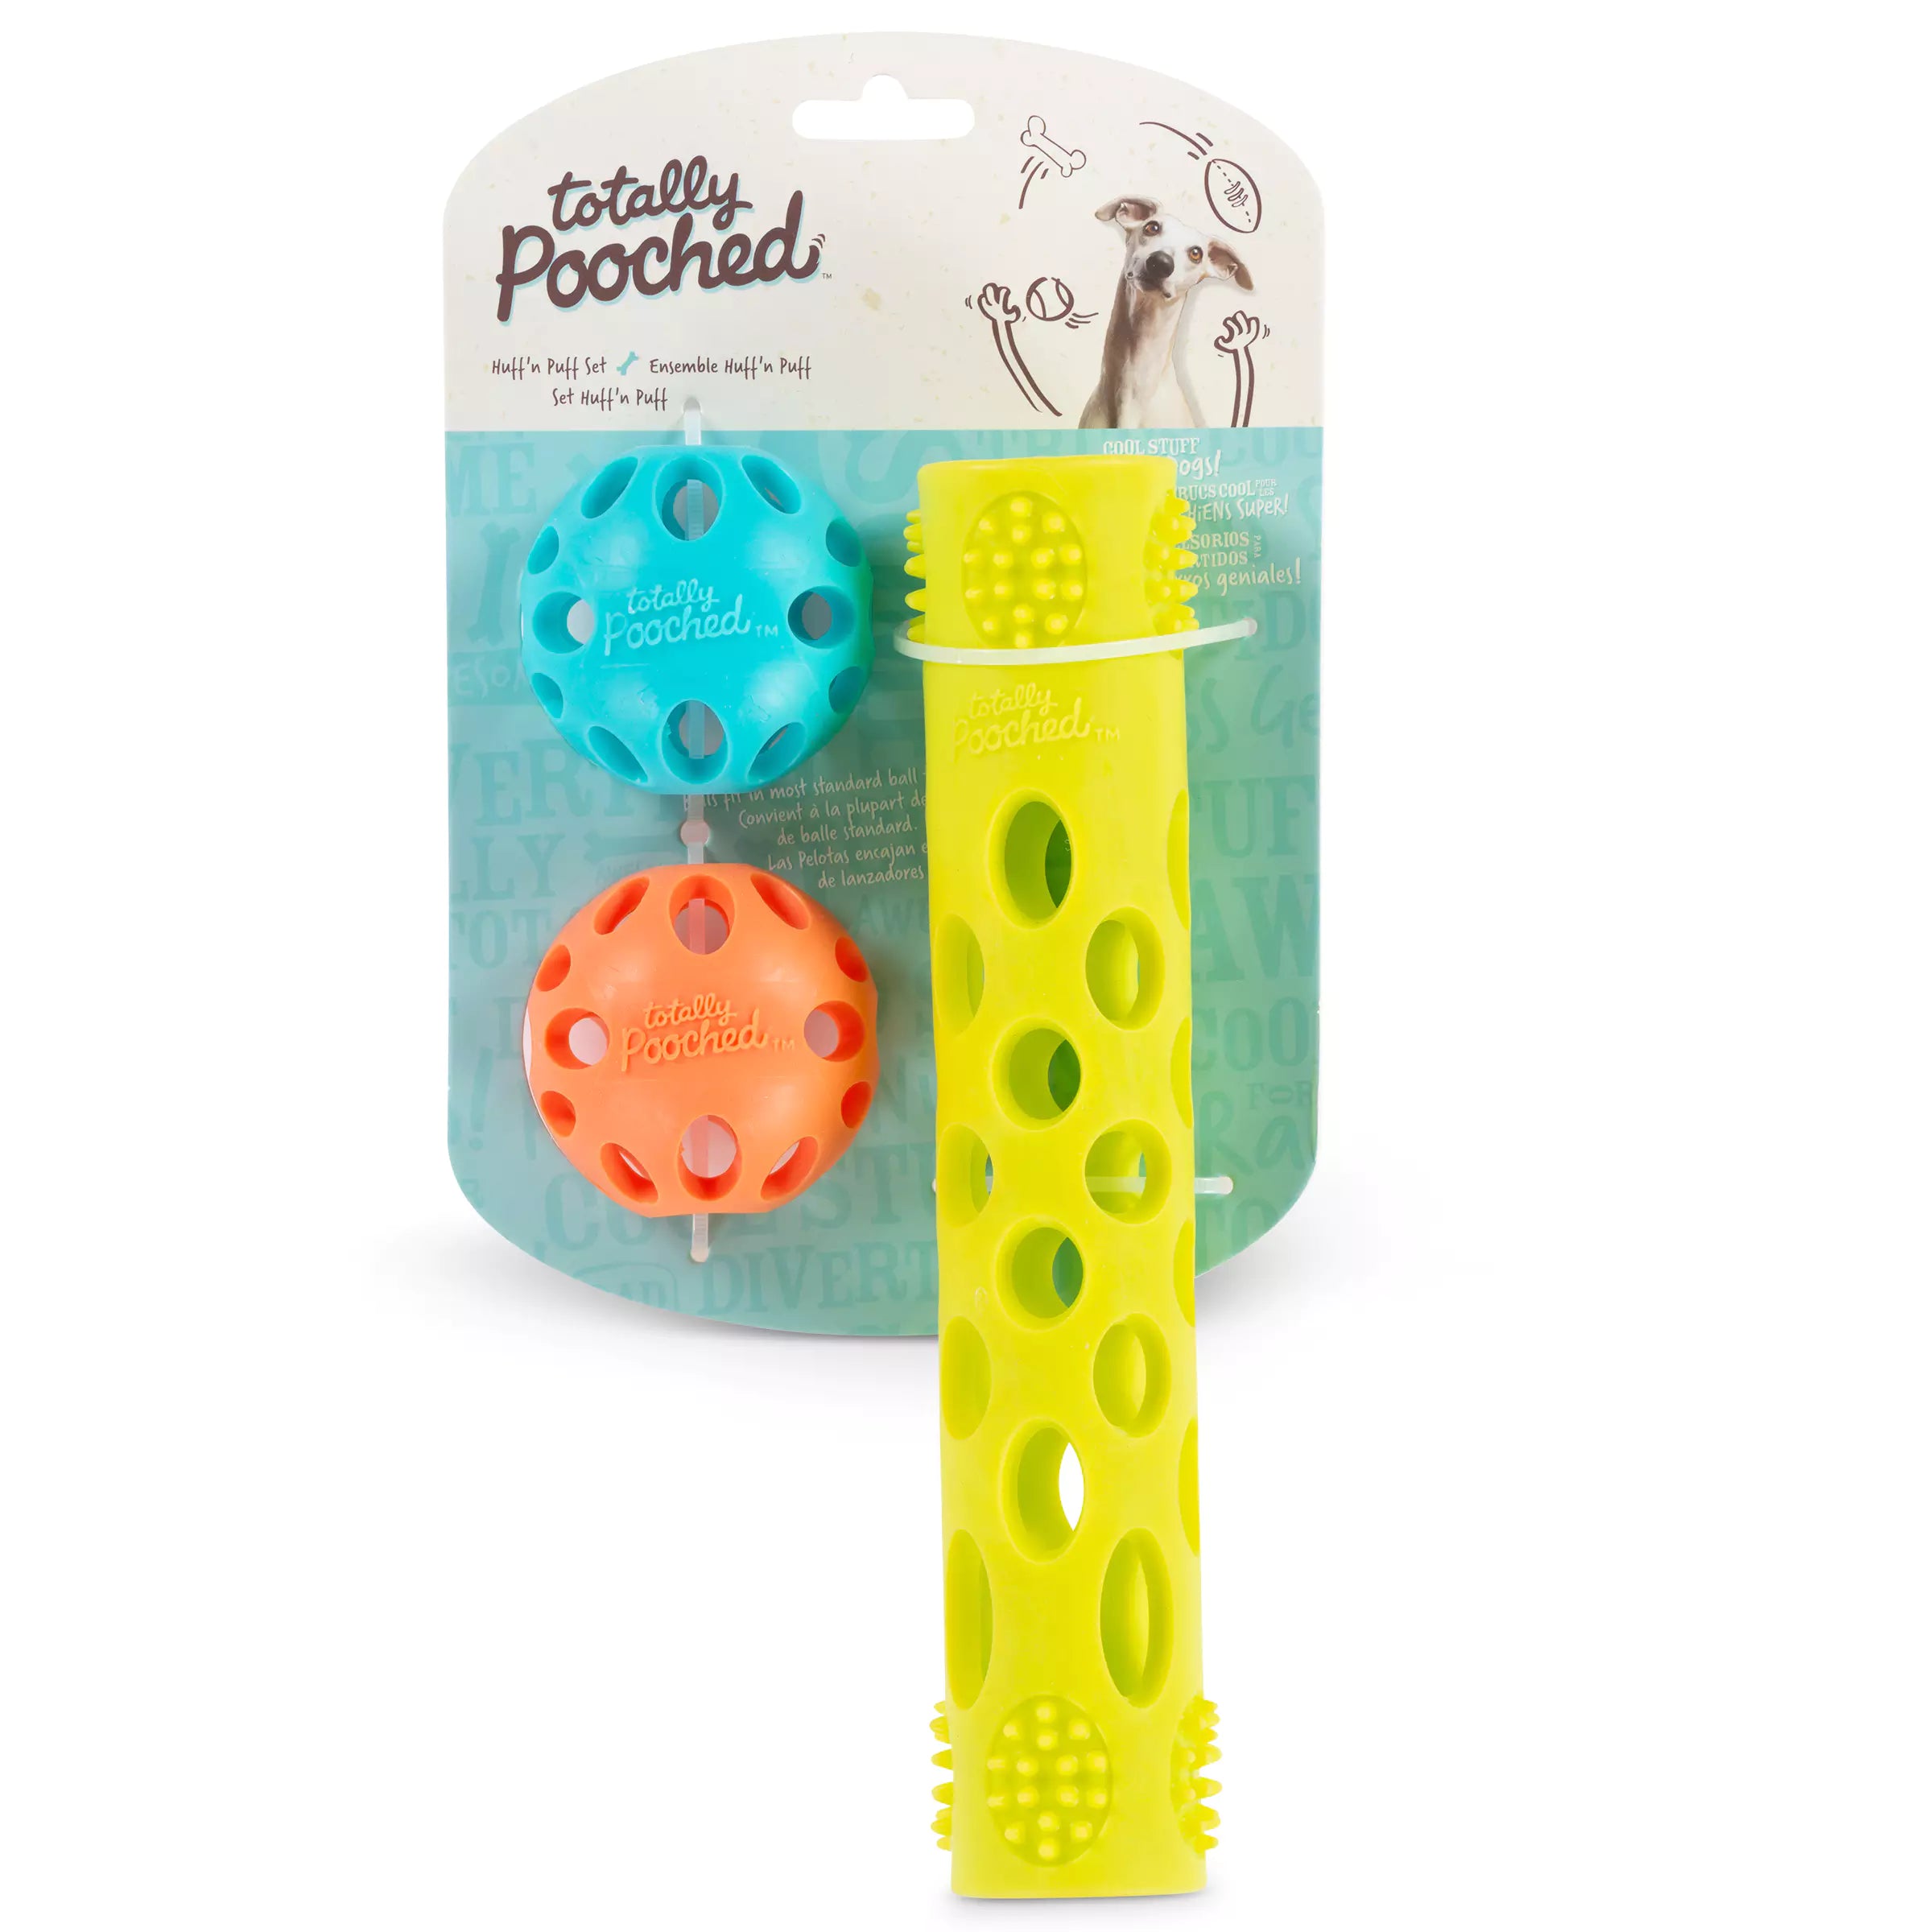 Totally Pooched - Huff'n Puff Rubber Ball & Stick Set 3pc